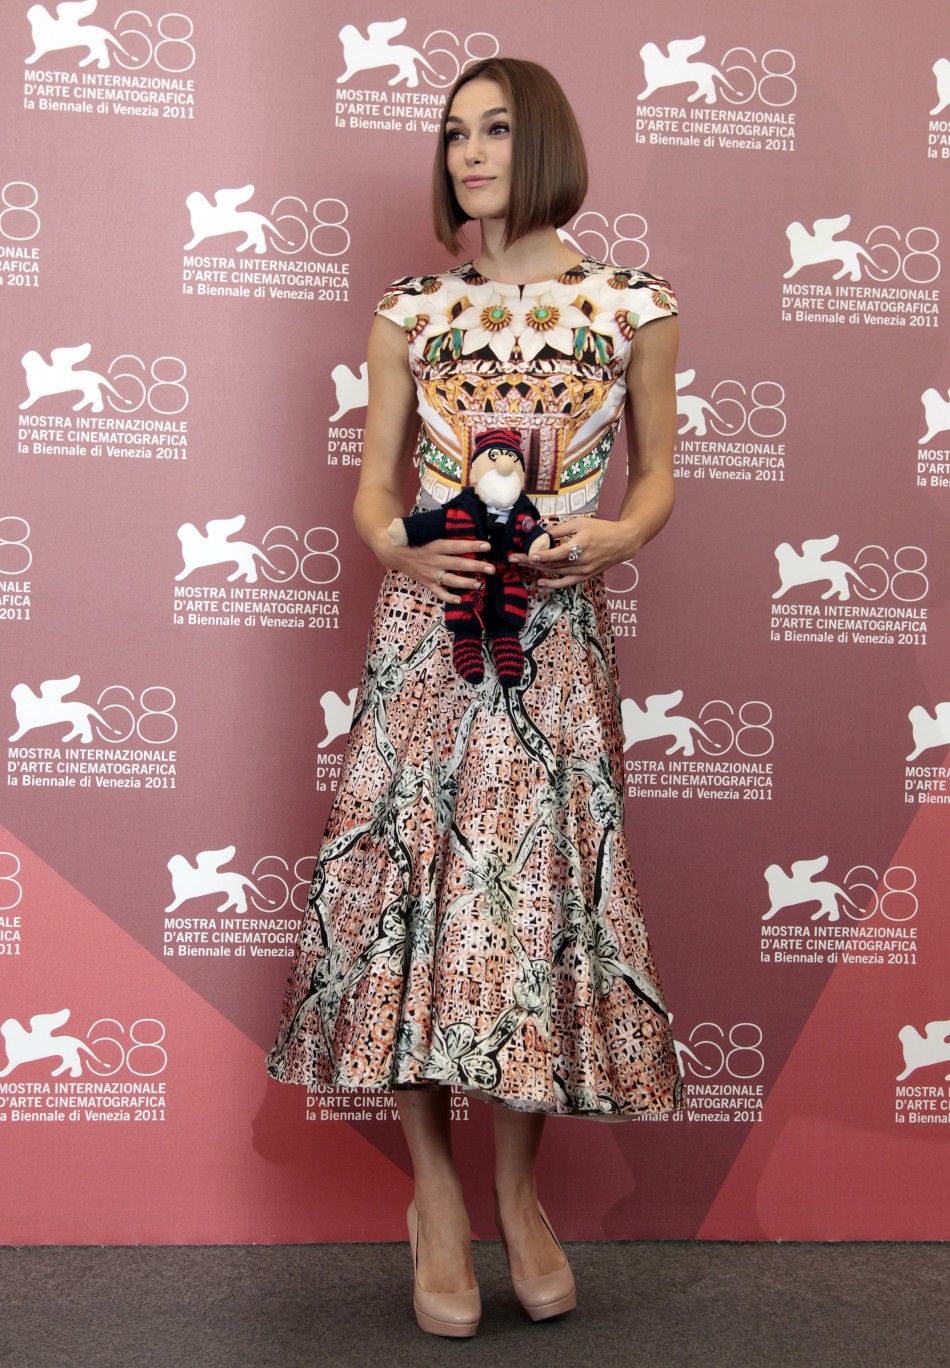 Actress Keira Knightley holds a cuddly toy given to her by co-star Viggo Mortensen at a photocall for their film quotA Dangerous Methodquot which is in competition at the 68th Venice Film Festival